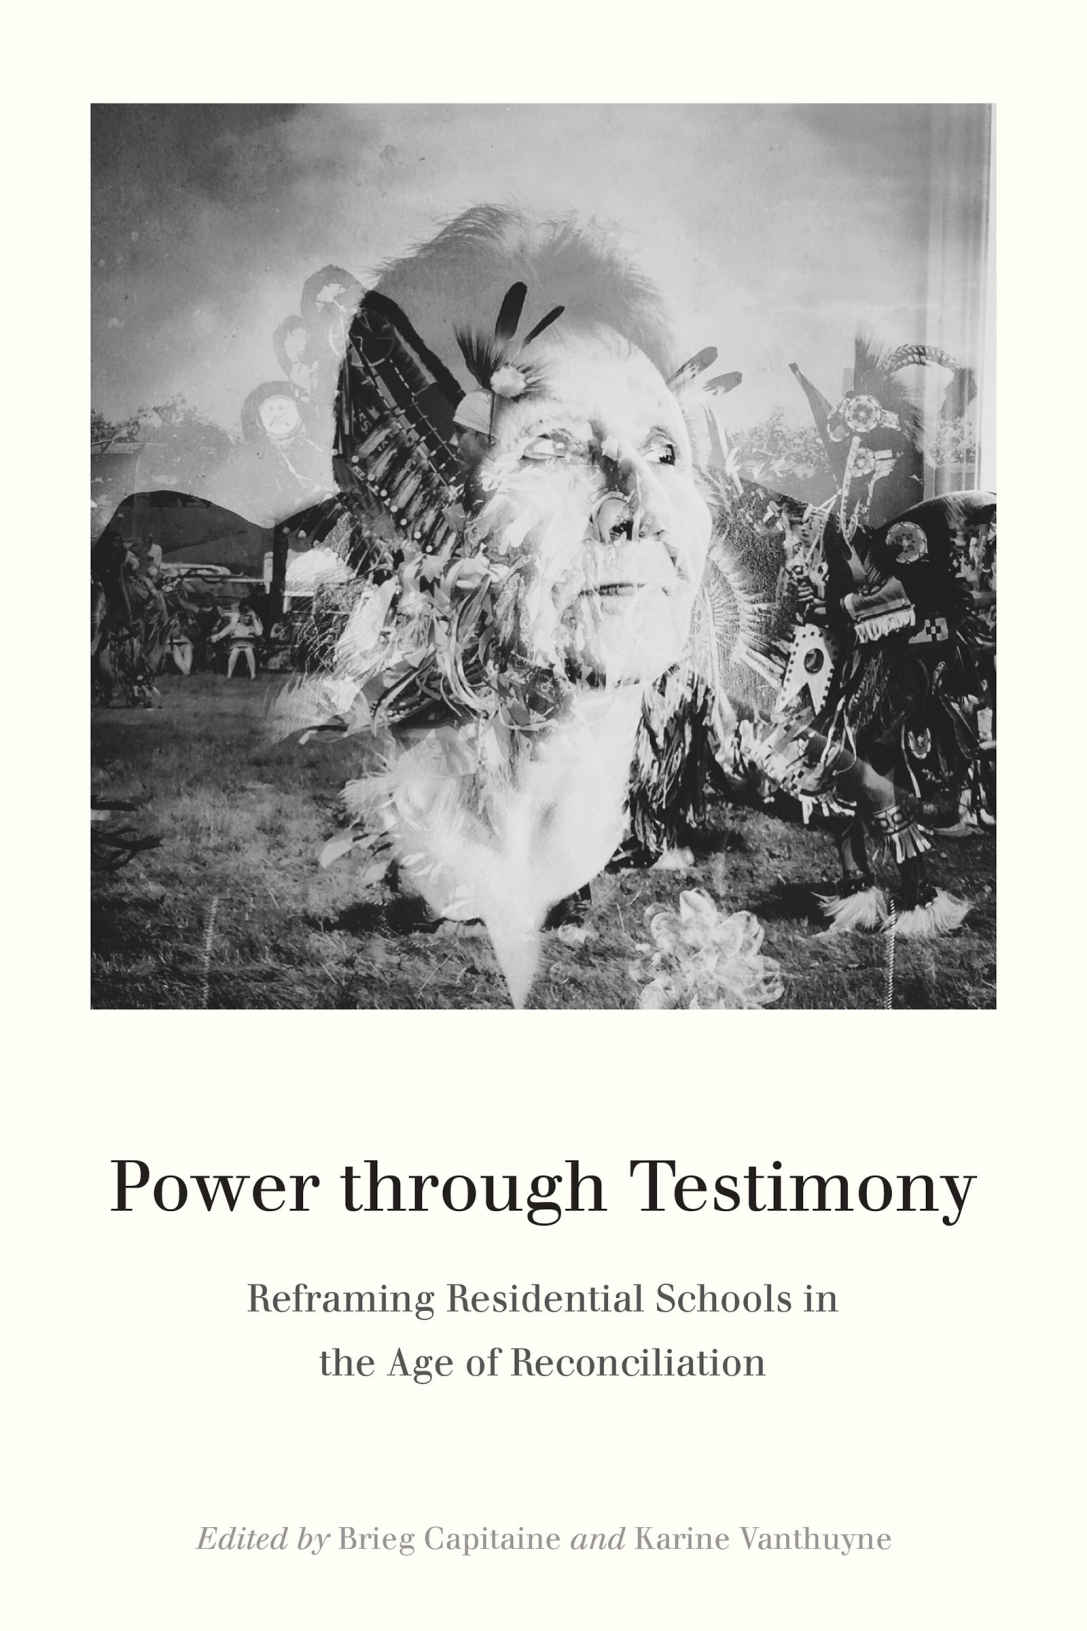 Power through Testimony. Reframing Residential Schools in the Age of Reconciliation